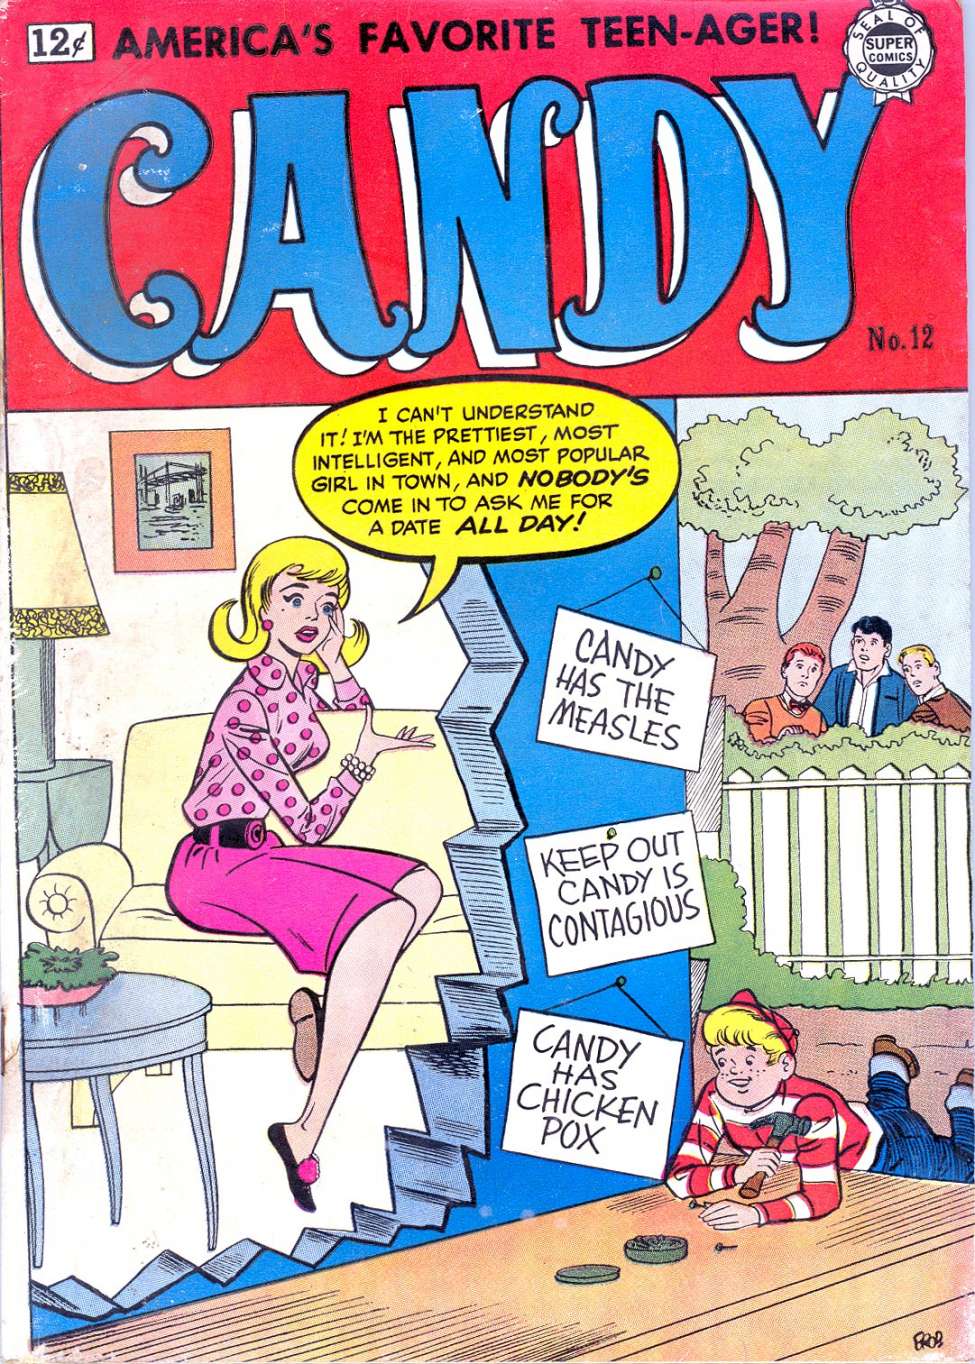 Book Cover For Candy 17 - Version 2